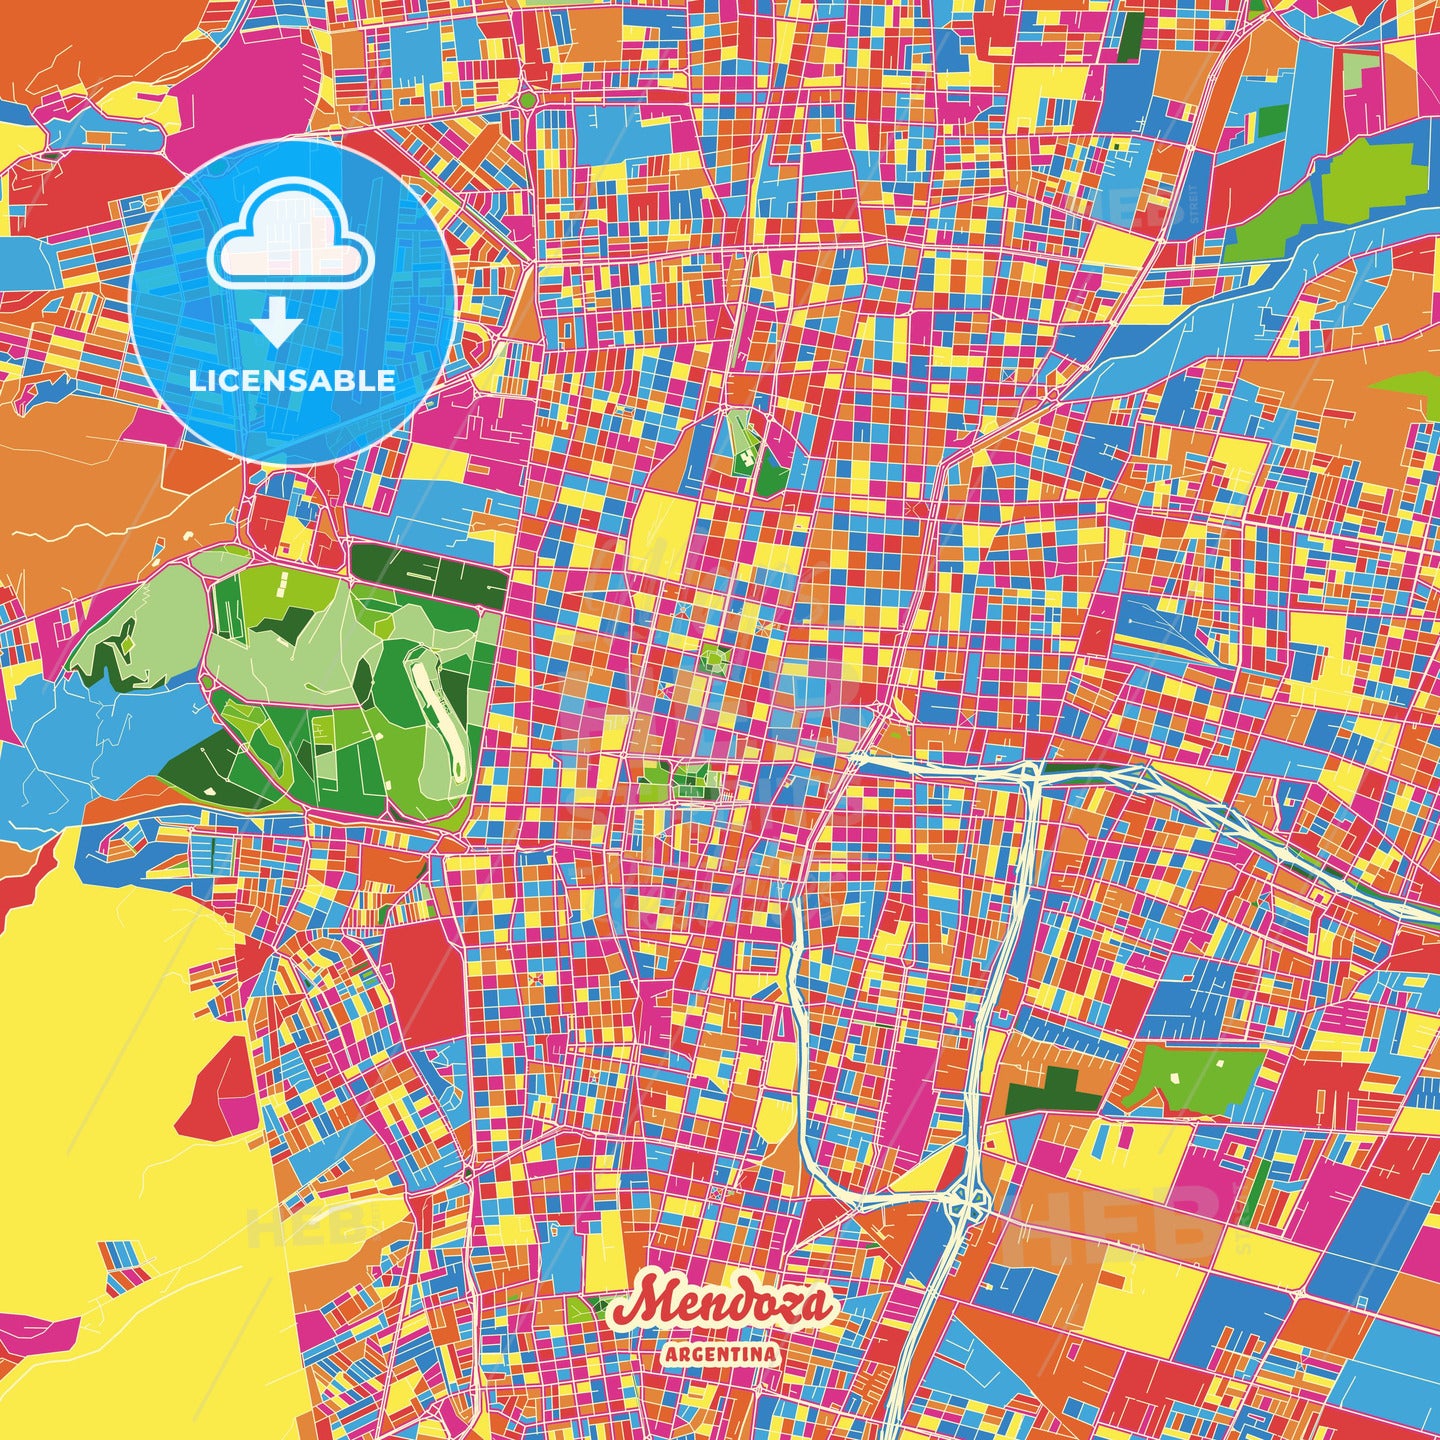 Mendoza, Argentina Crazy Colorful Street Map Poster Template - HEBSTREITS Sketches